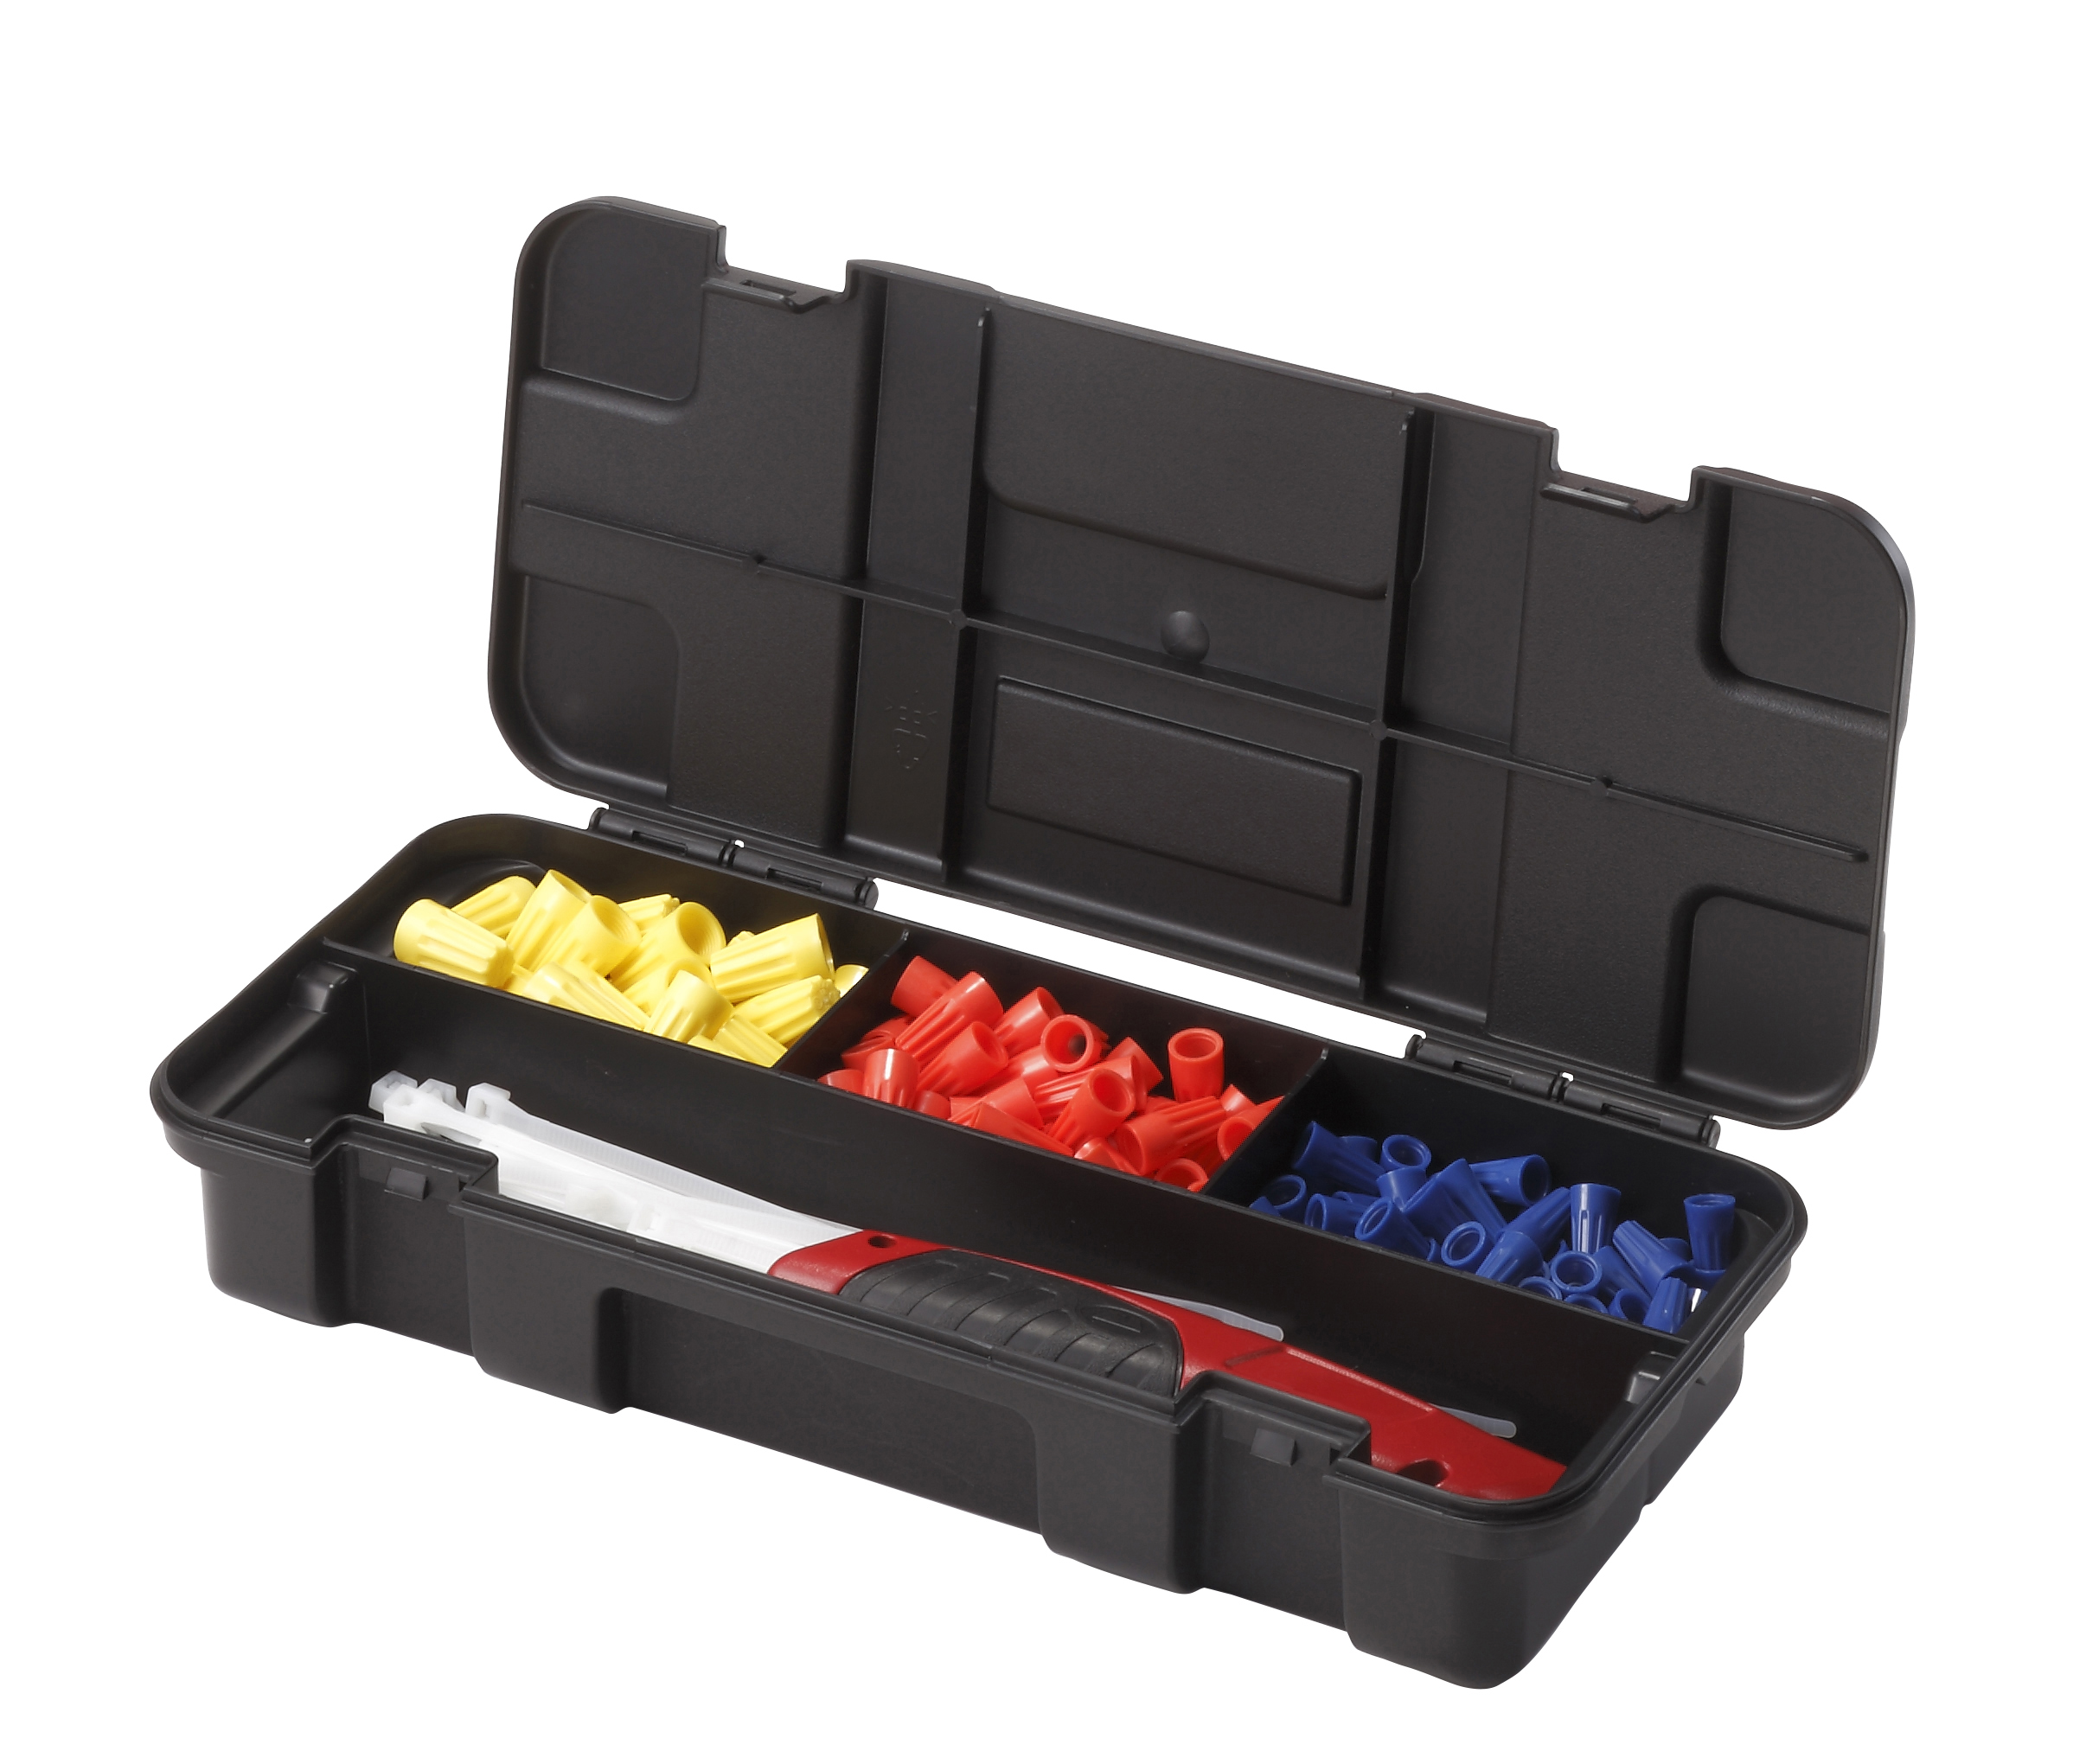 HART Technician Case, Heavy Duty Tool Box for Tool and Hardware Storage, Black - image 4 of 9